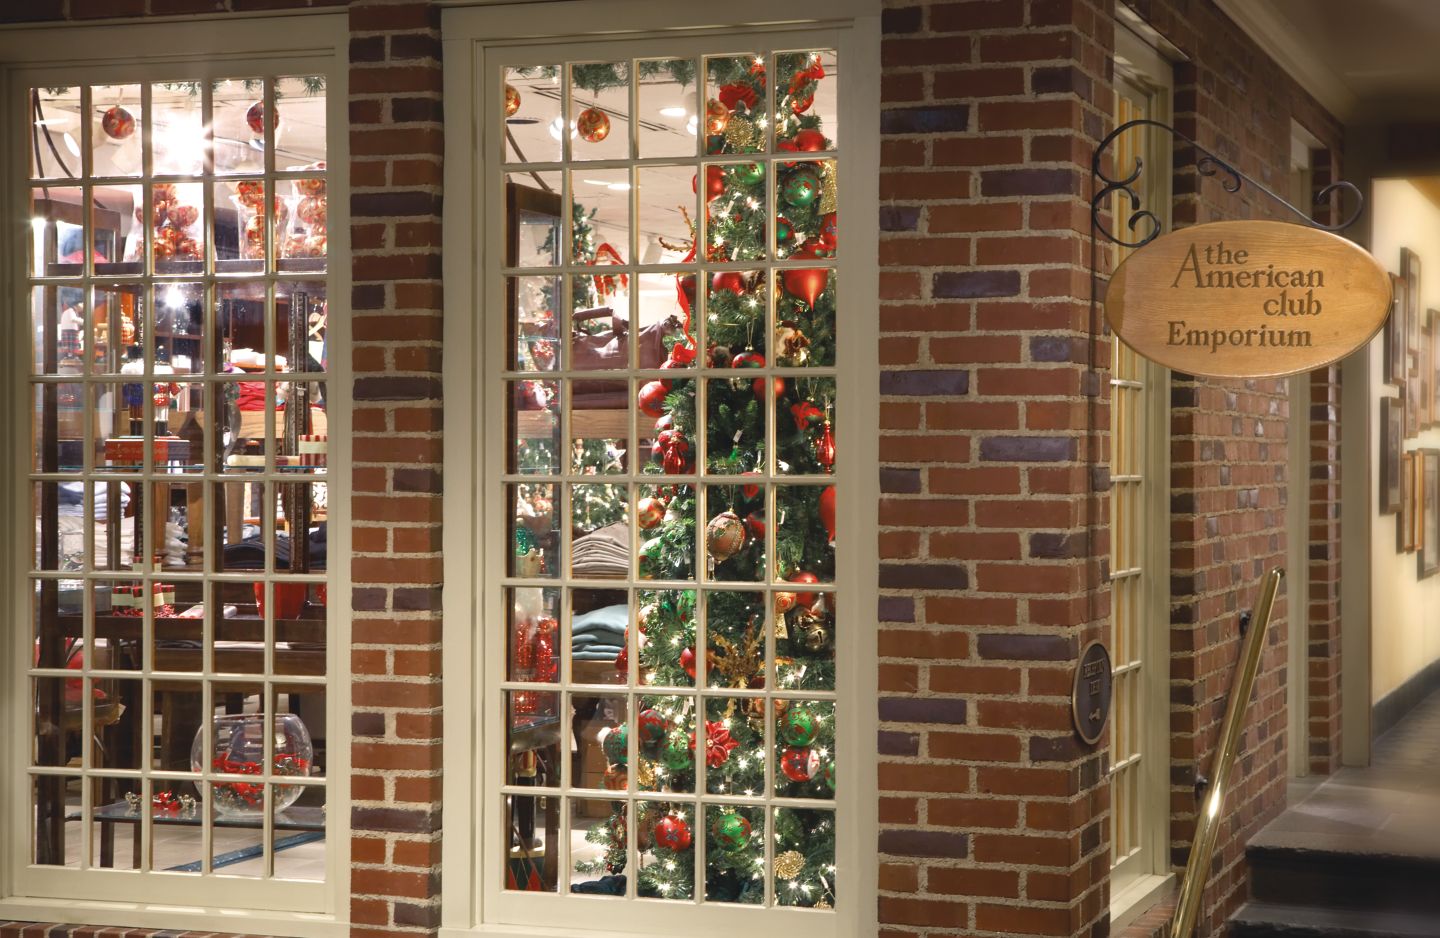 Exterior of Emporium gift shop looking through a window at a holiday tree